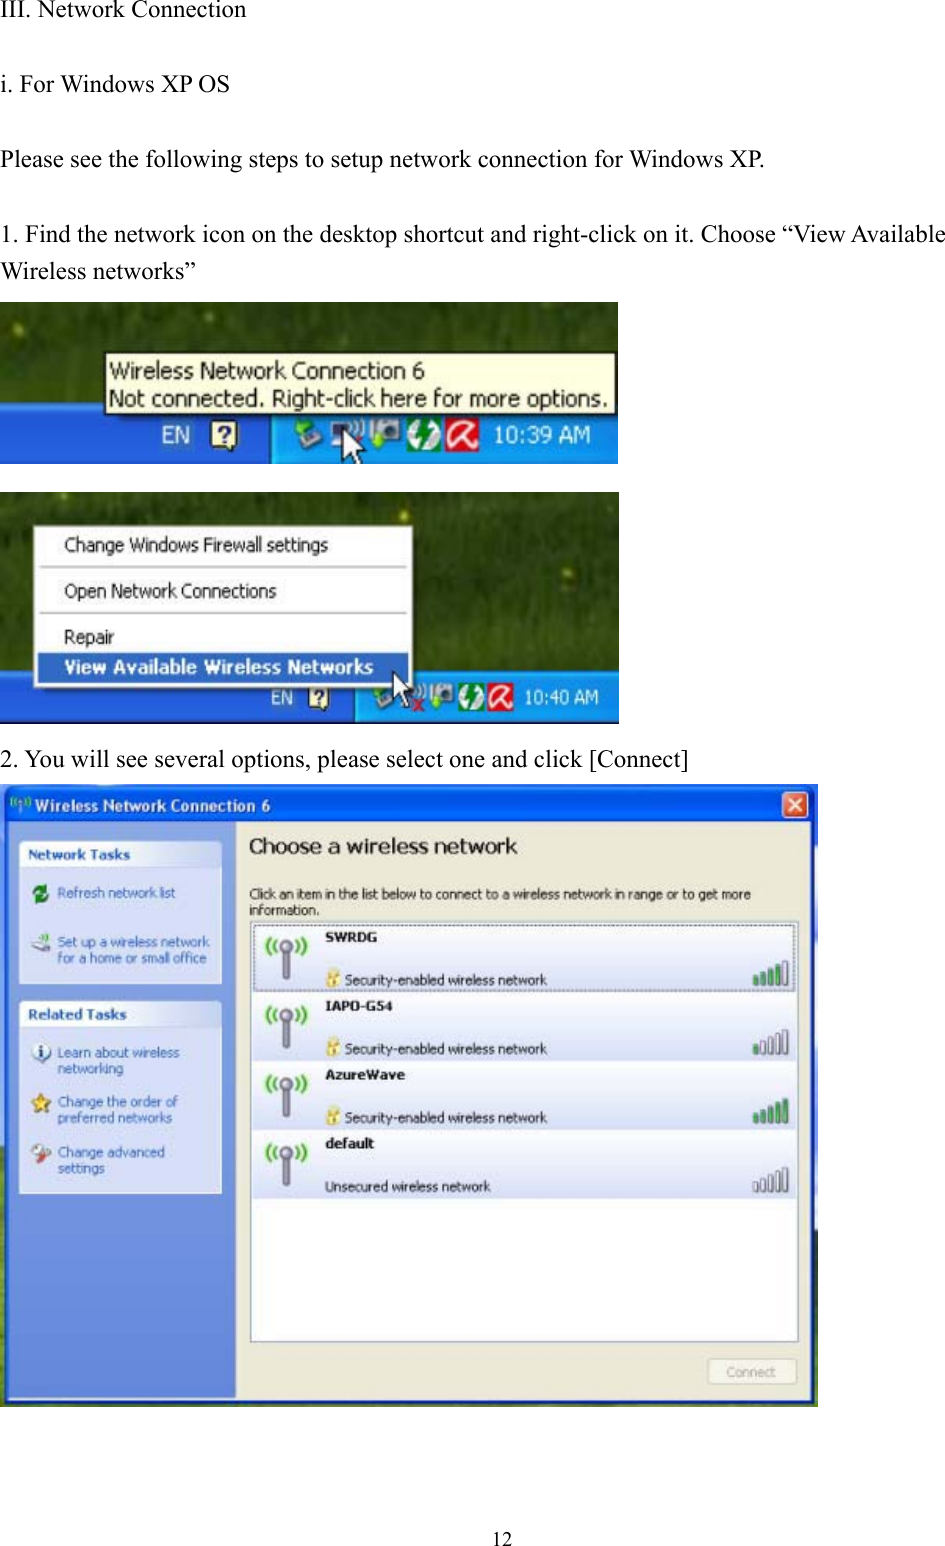 12III. Network Connection i. For Windows XP OS Please see the following steps to setup network connection for Windows XP. 1. Find the network icon on the desktop shortcut and right-click on it. Choose “View Available Wireless networks” 2. You will see several options, please select one and click [Connect] 